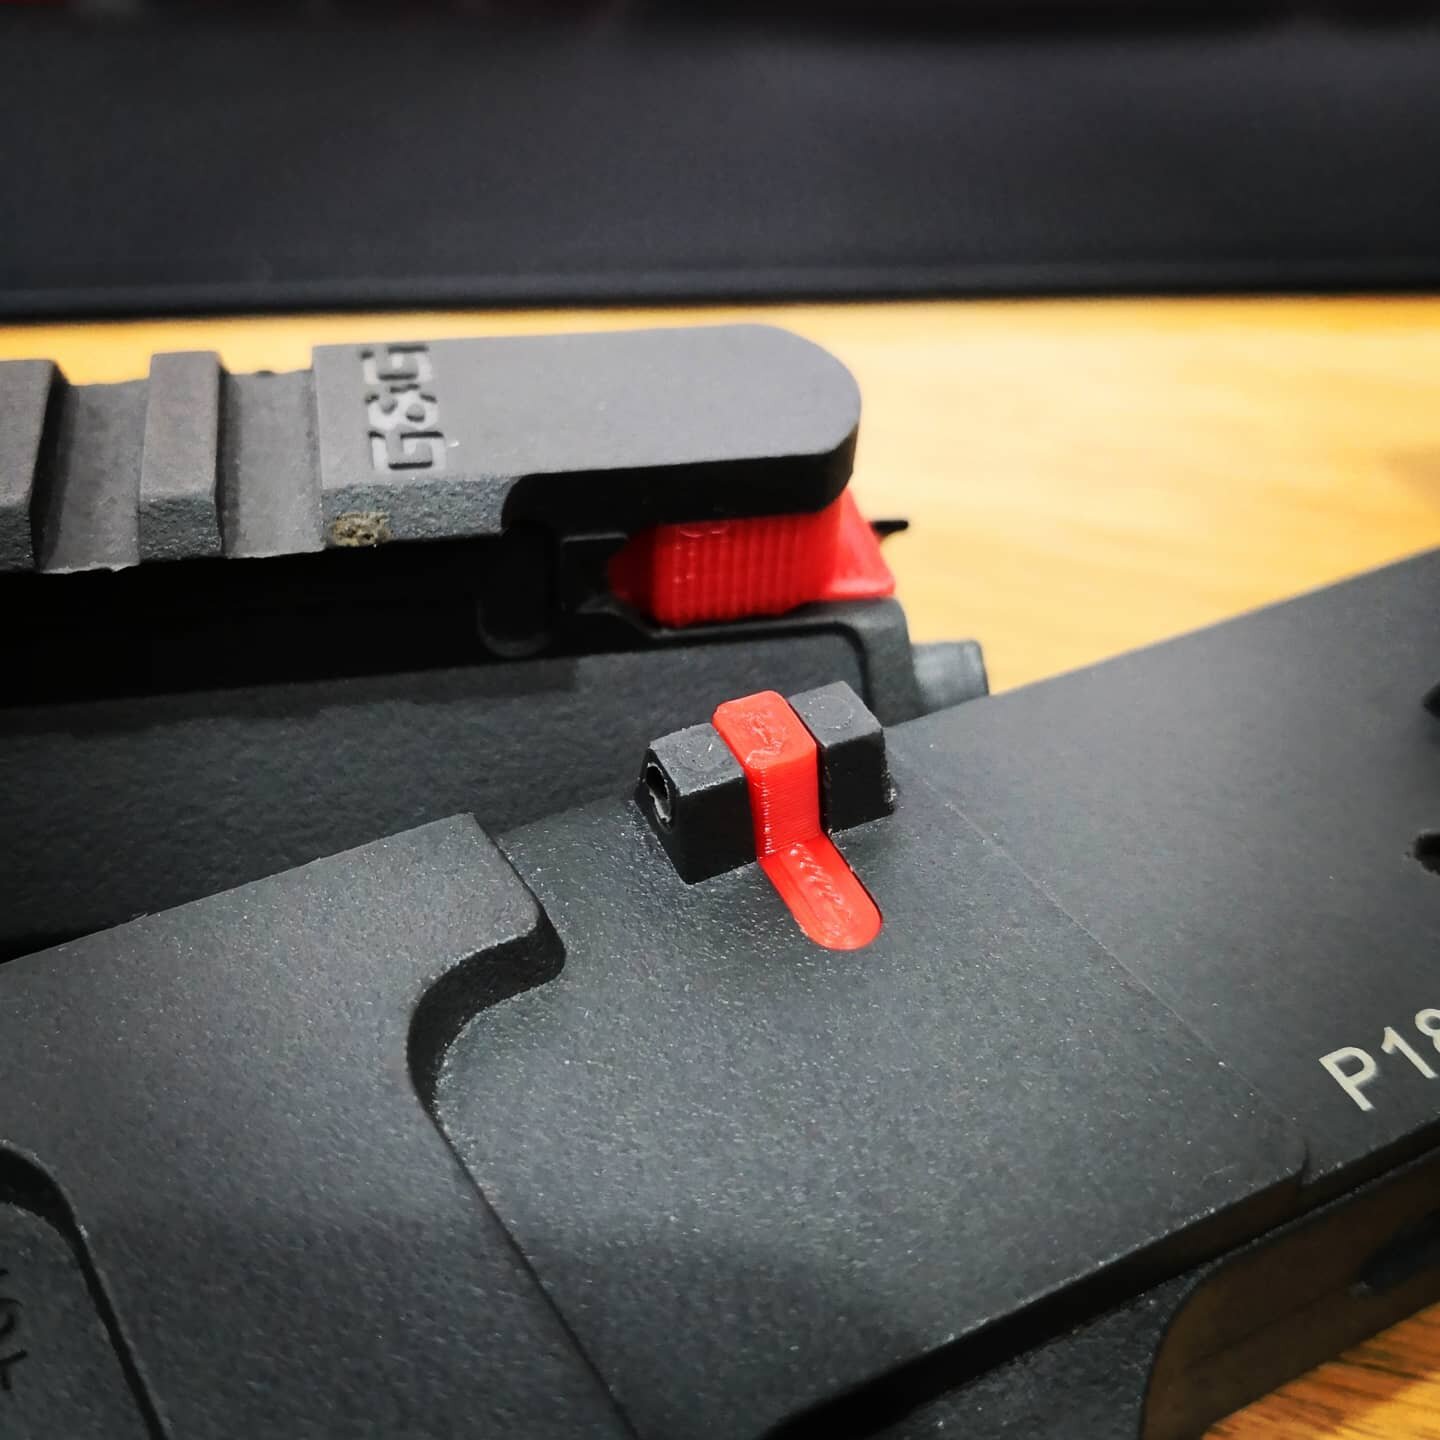 Red ARP blanking kits are being shipped world-wide tomorrow! Thanks for the recent orders everyone ❤️

www.badas.design 

#airsoft #airsoftuk #airsoftworld #speedsoft #supair #speedqb #6mm #pewpew #3dprinting #3dprint #arp9 #airsoftnation #airsoftgun